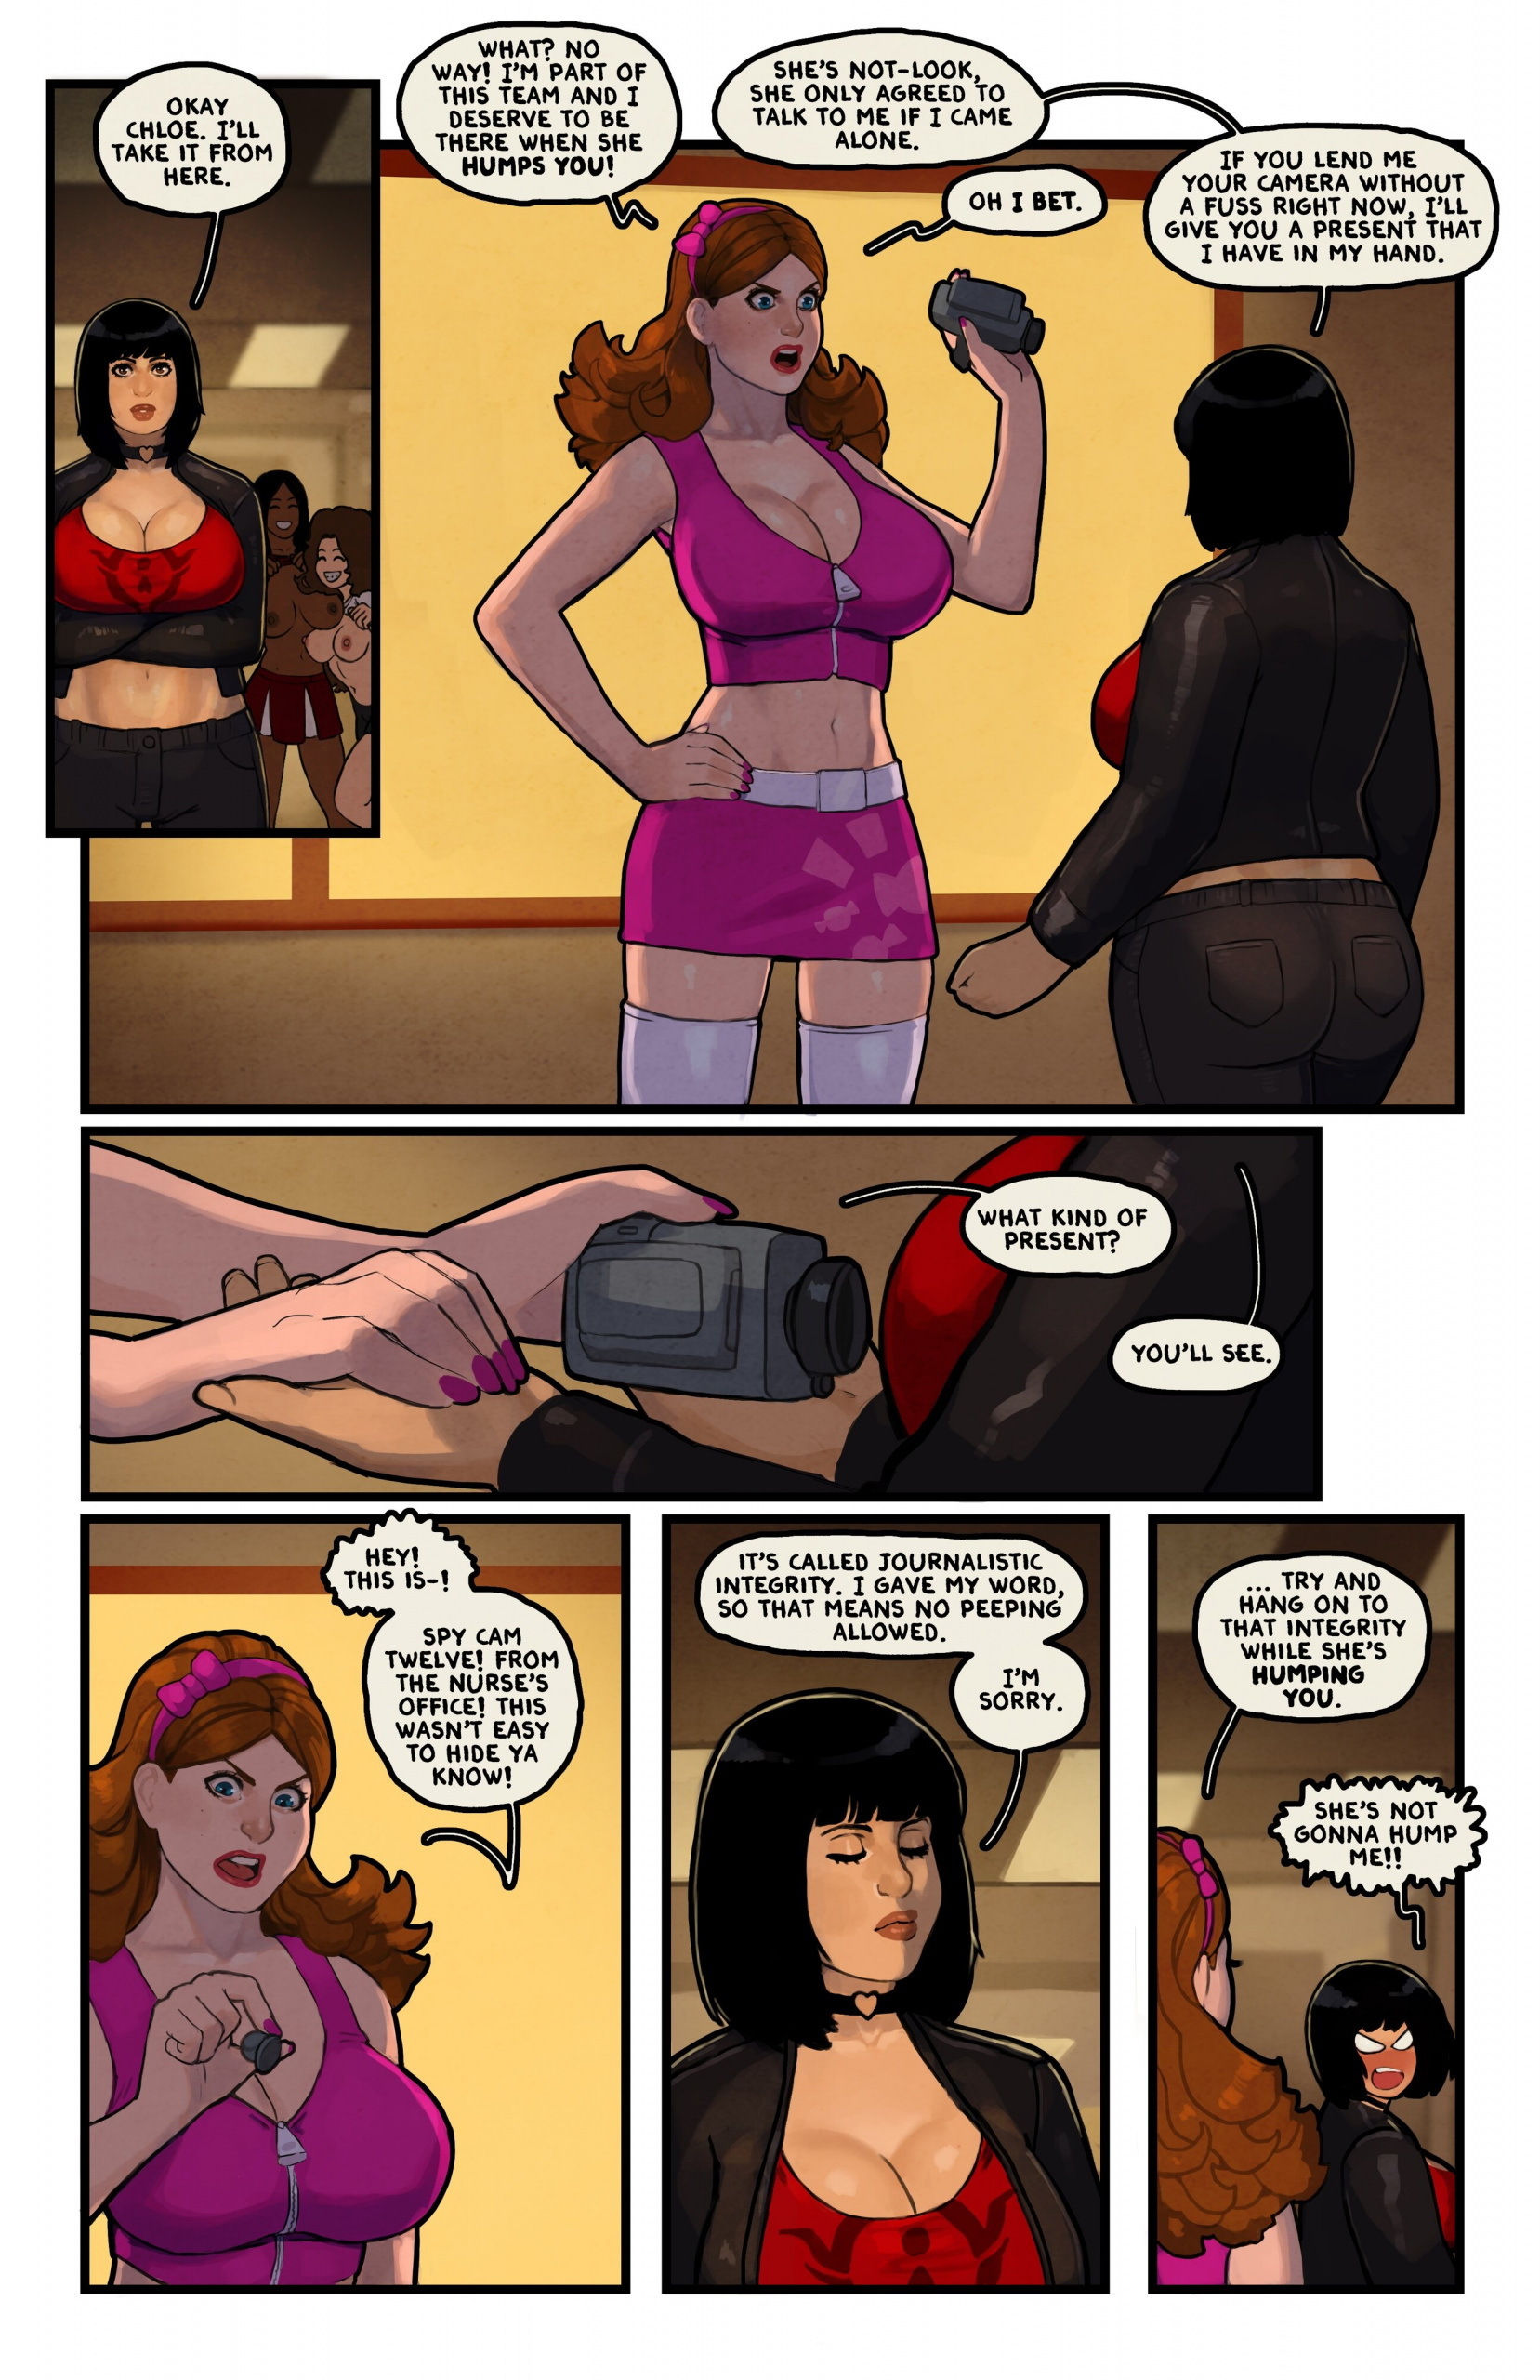 This Romantic World - Page 205